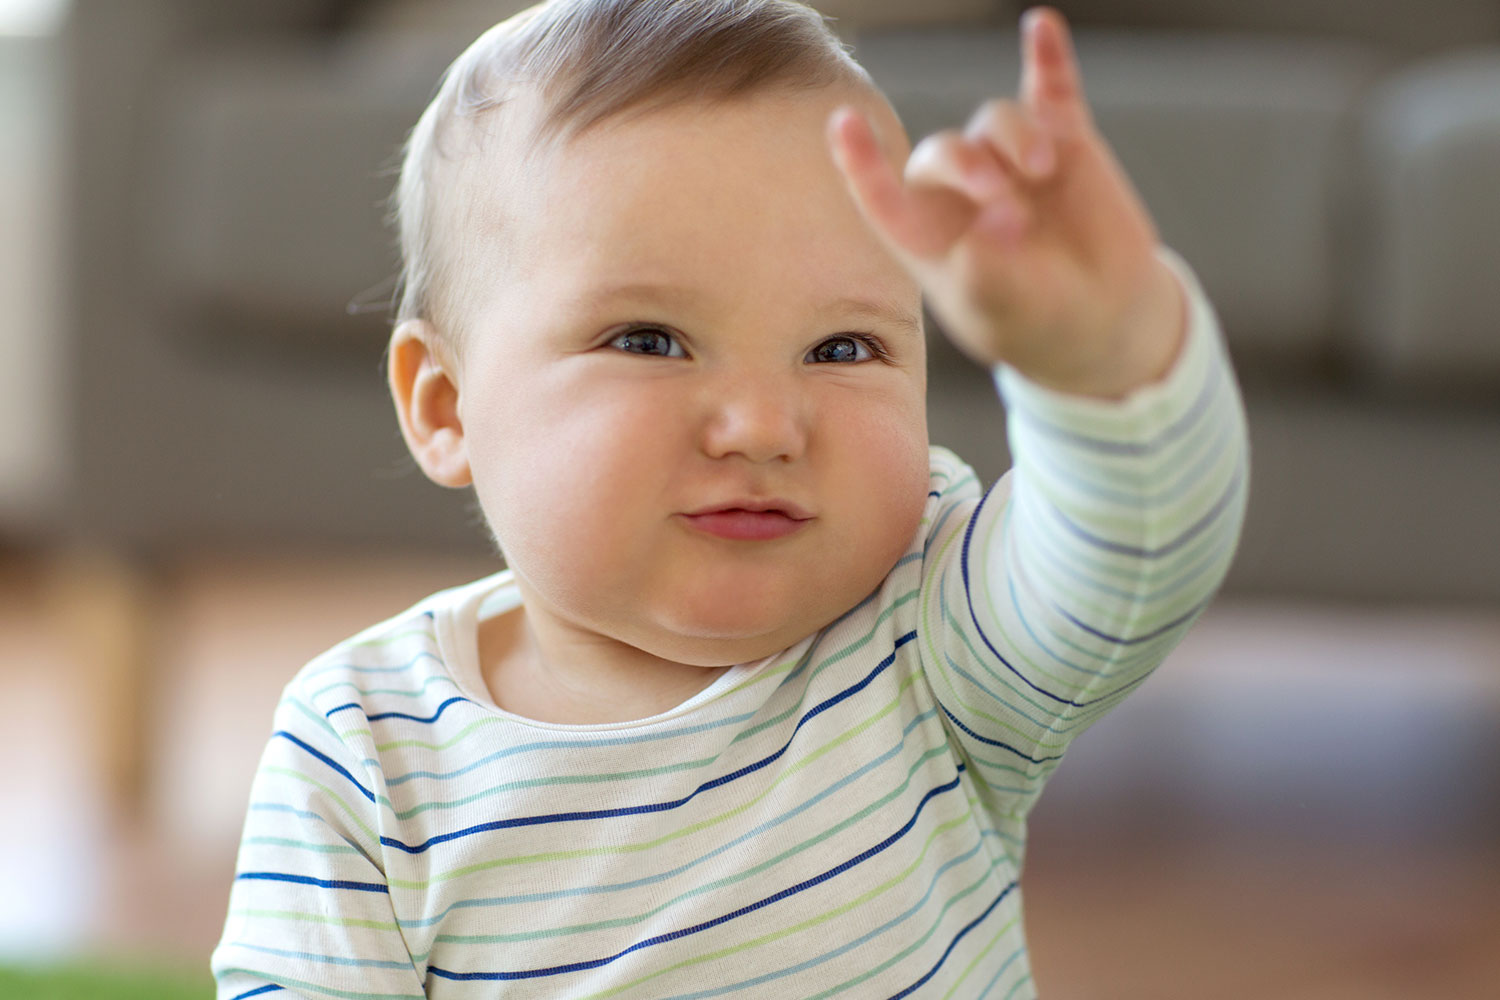 baby is striped shirt with their left hand up to make a sign